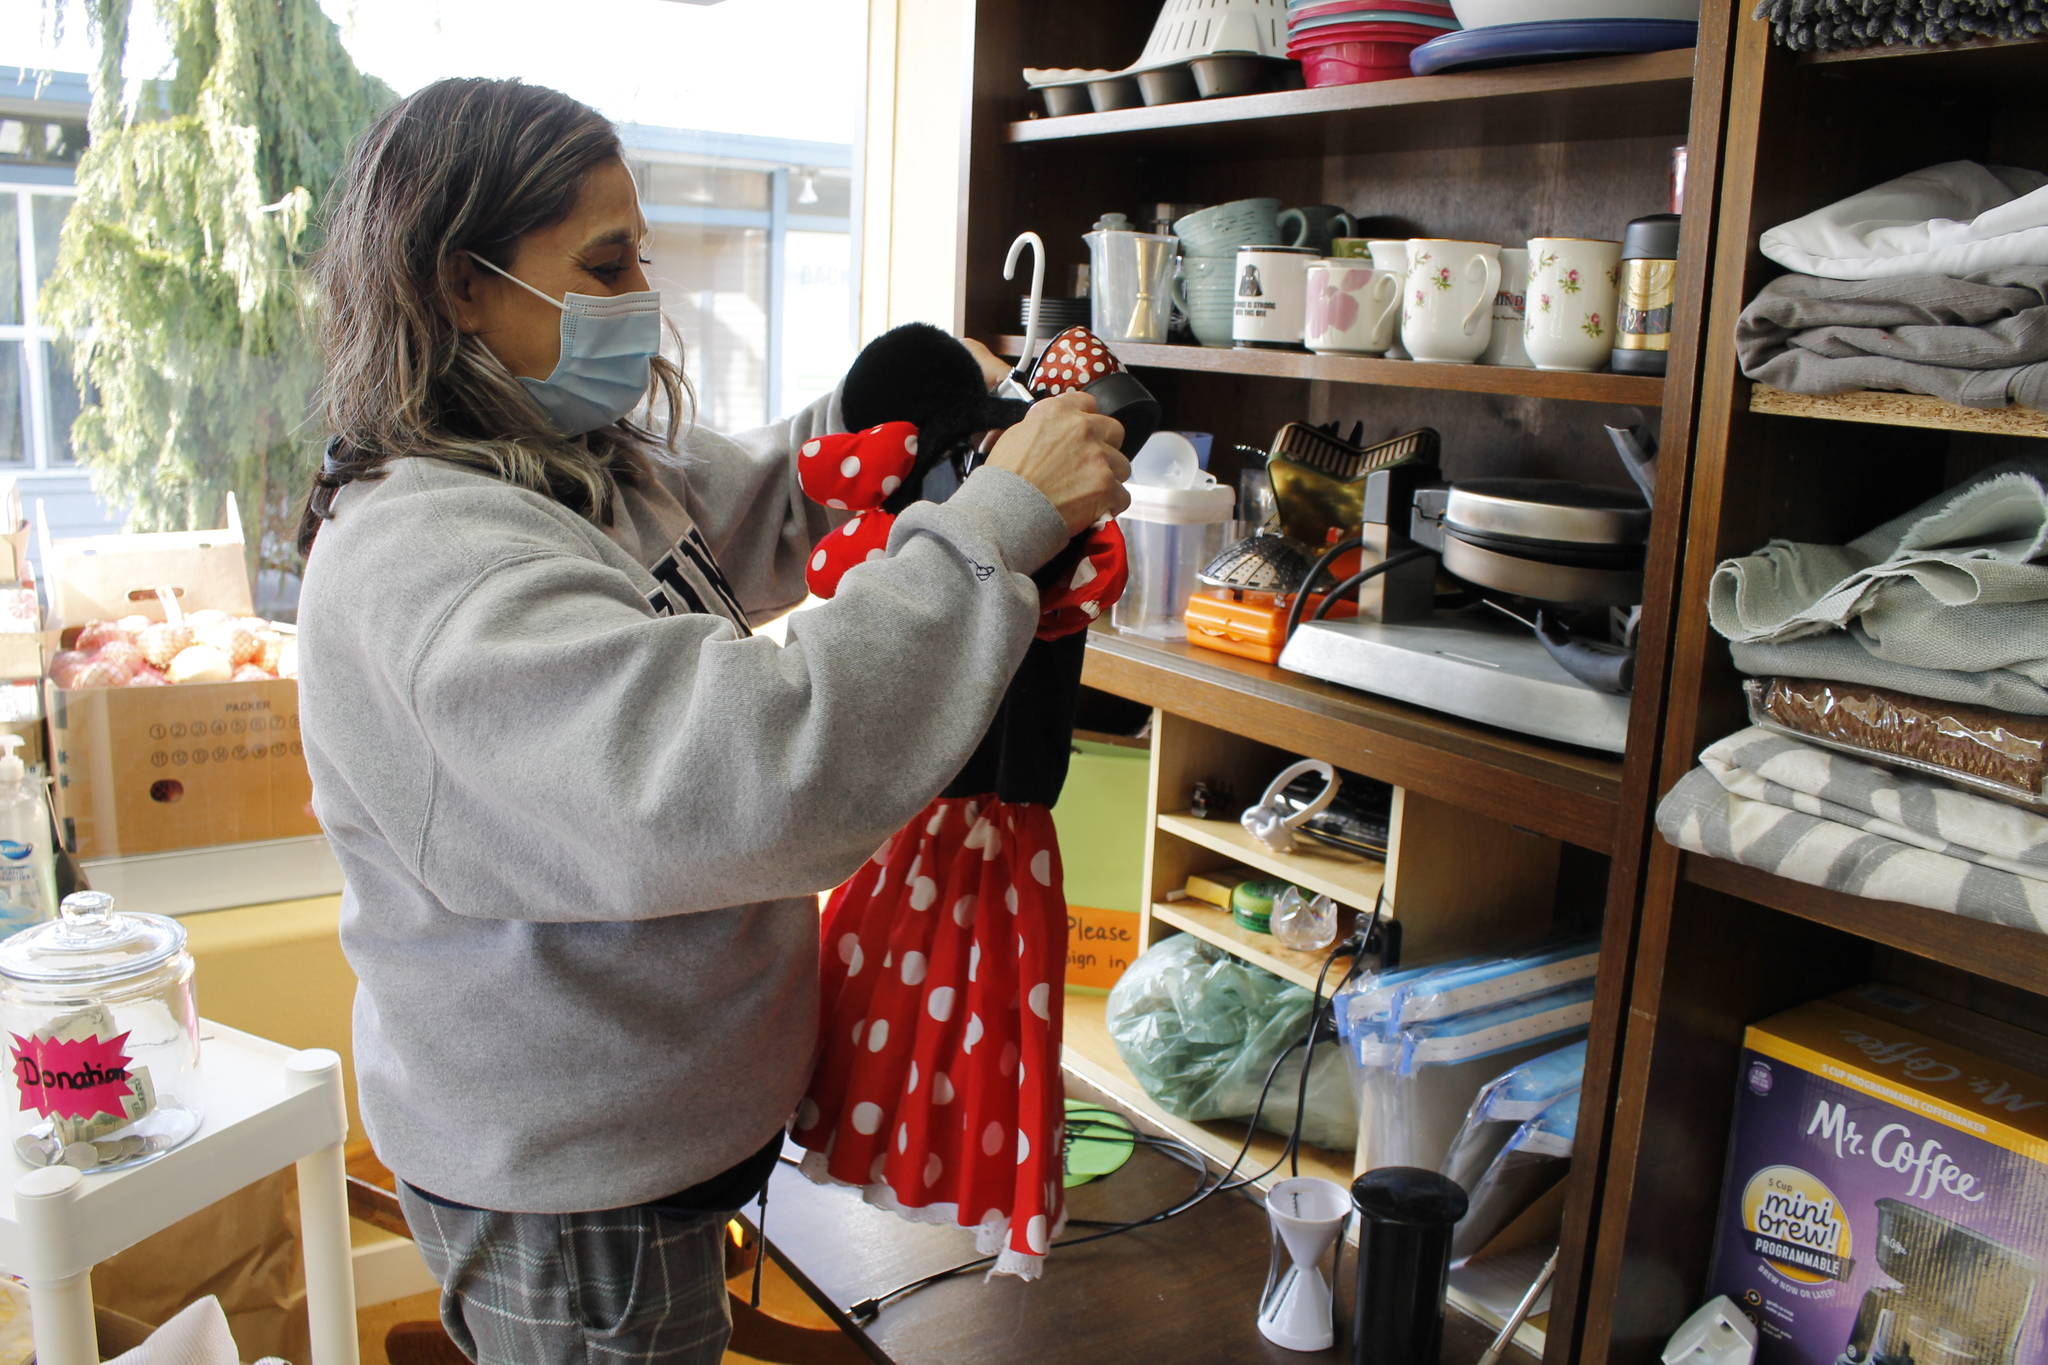 Photo by Kira Erickson/South Whidbey Record
Cindy Buchanan, founder of Whidbey Island Angels, hangs up a toddler's Minnie Mouse outfit.